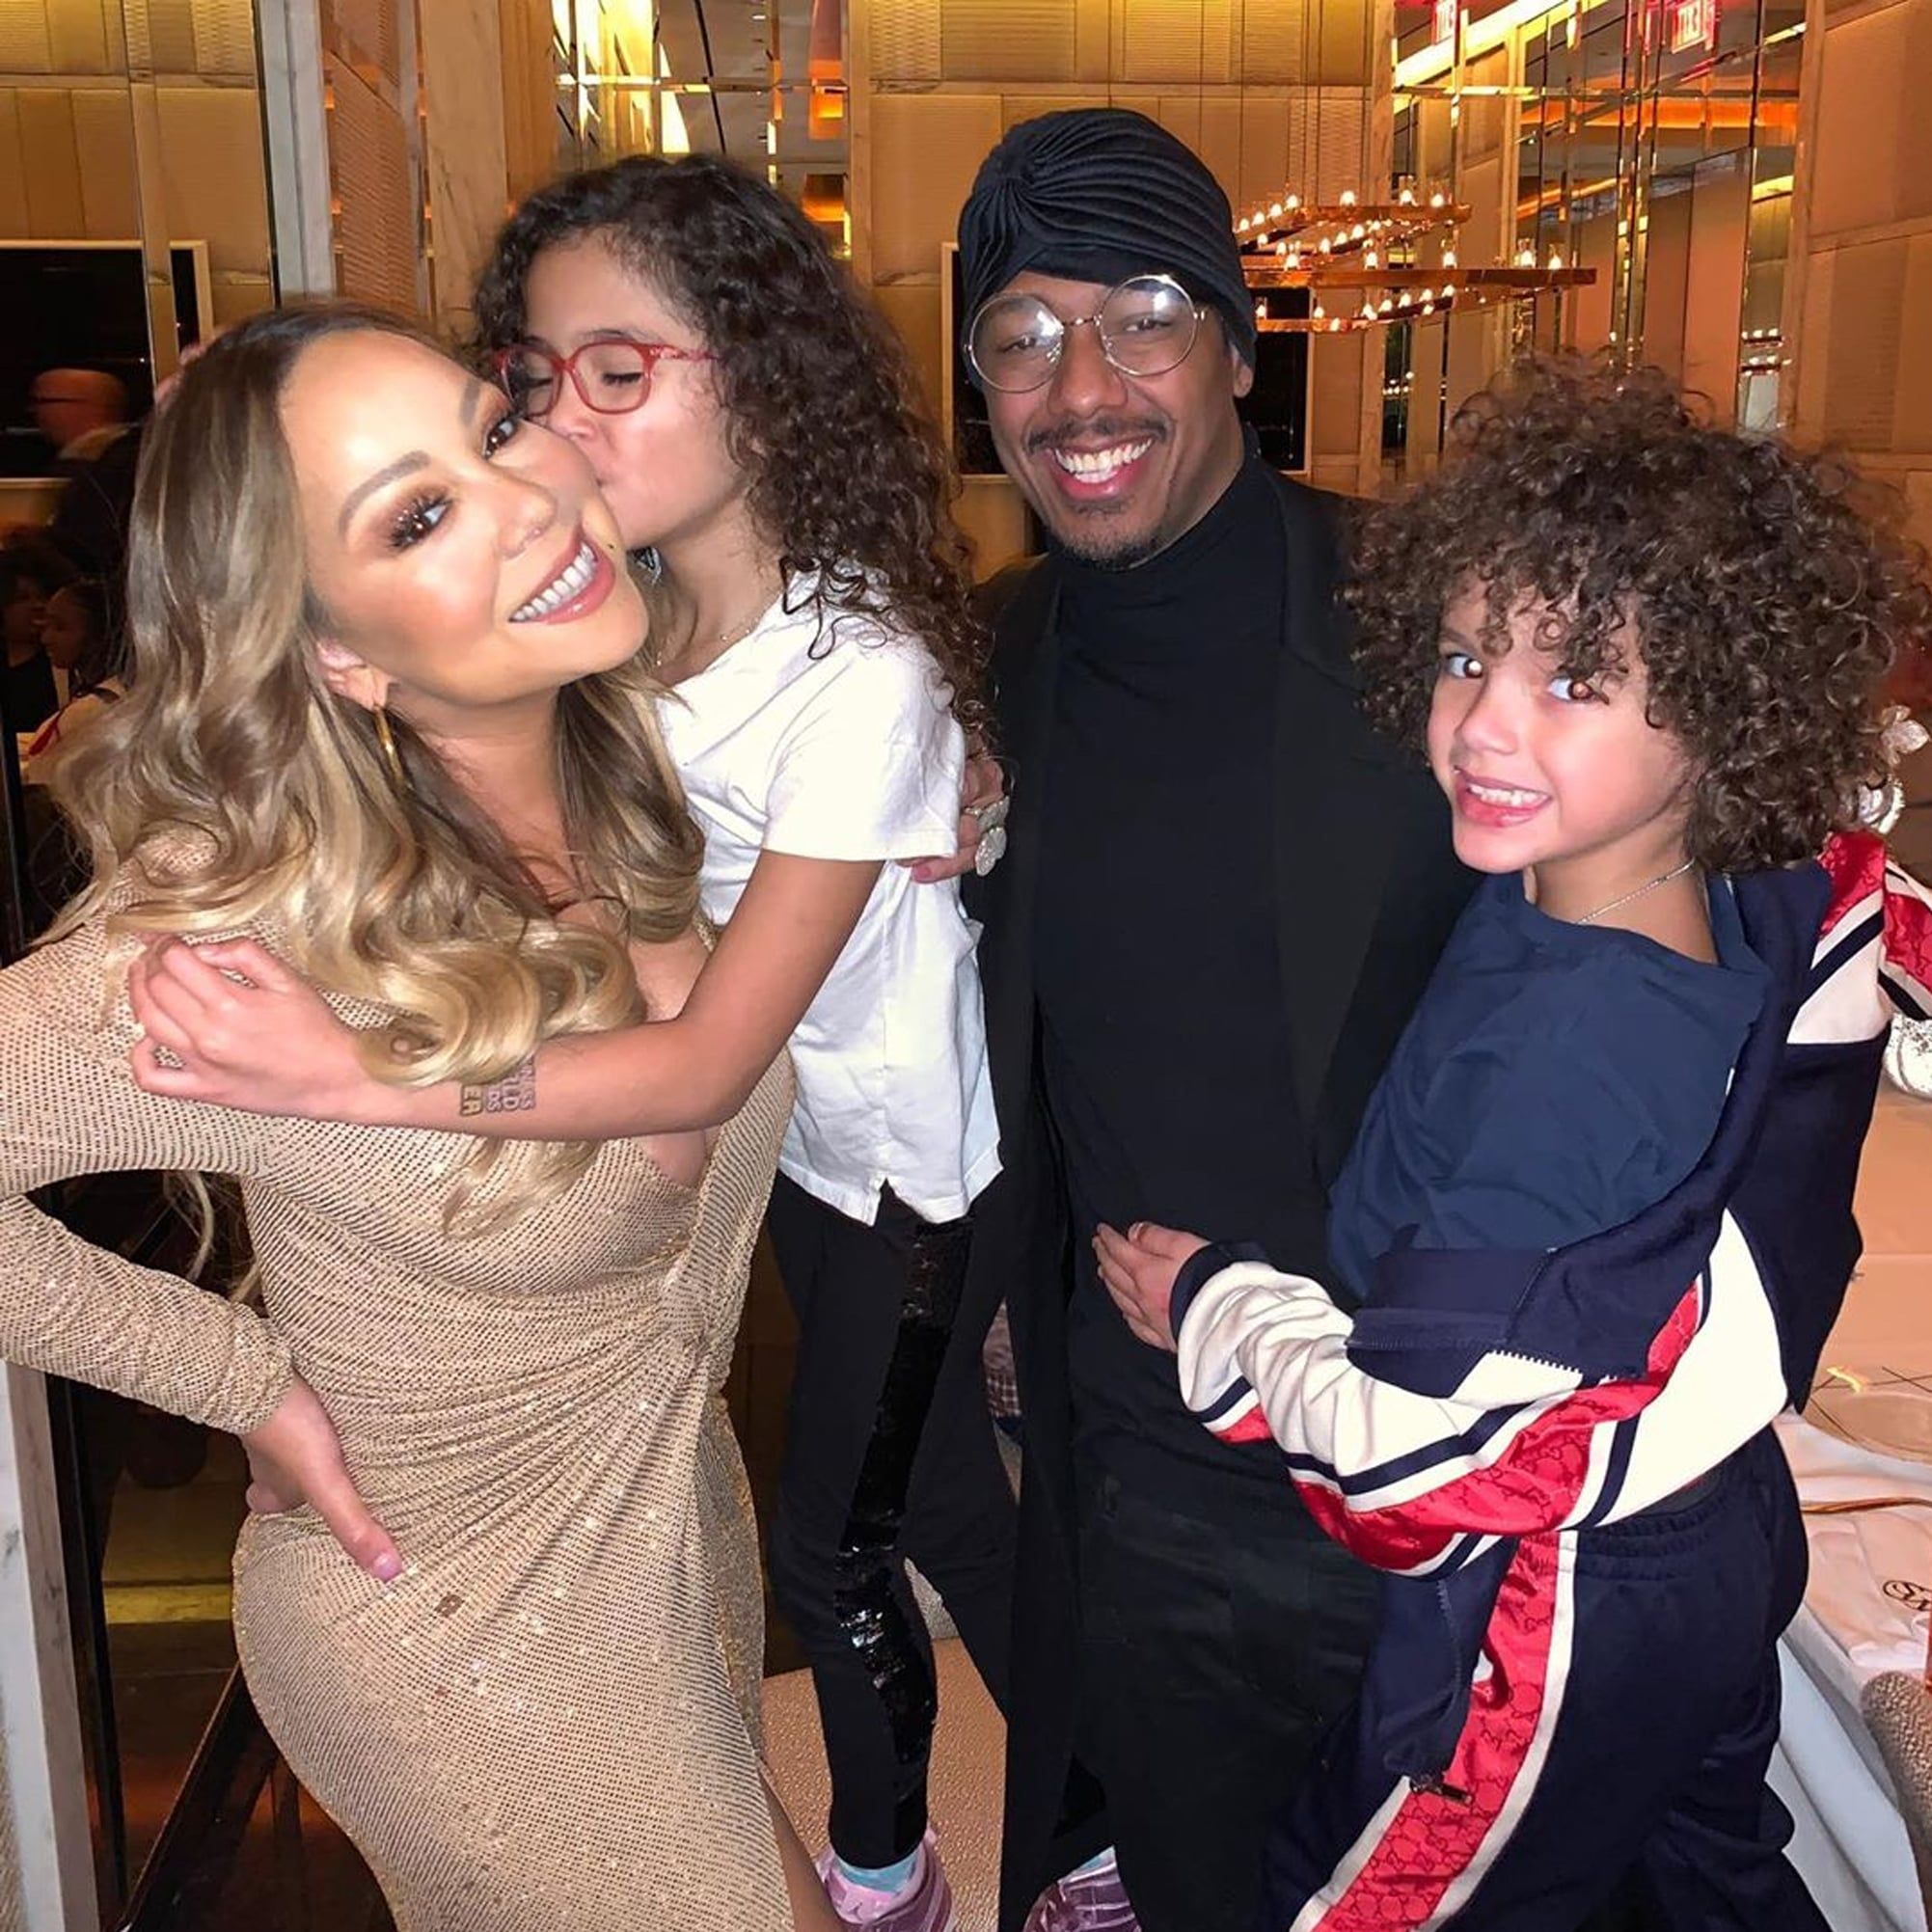 Nick Cannon Loves Having Kids, But Did He Ever Want More With Mariah Carey?